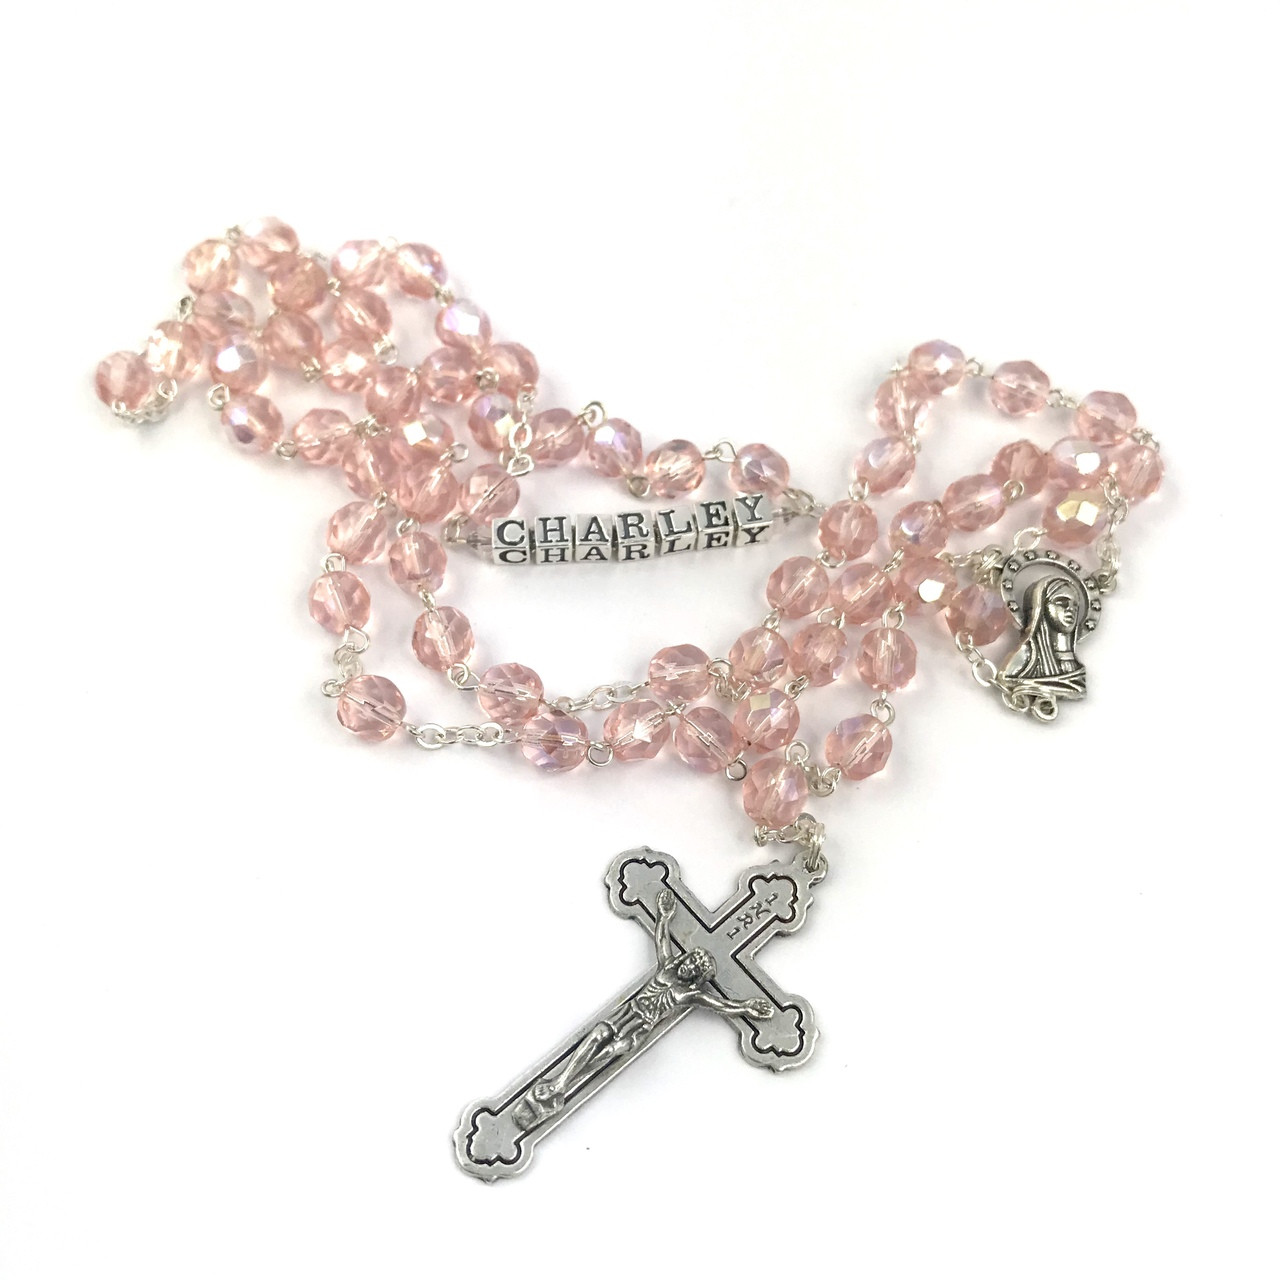 Buy Personalised Pink Rosary Beads - Crystal 6mm By Gifted Memories ...